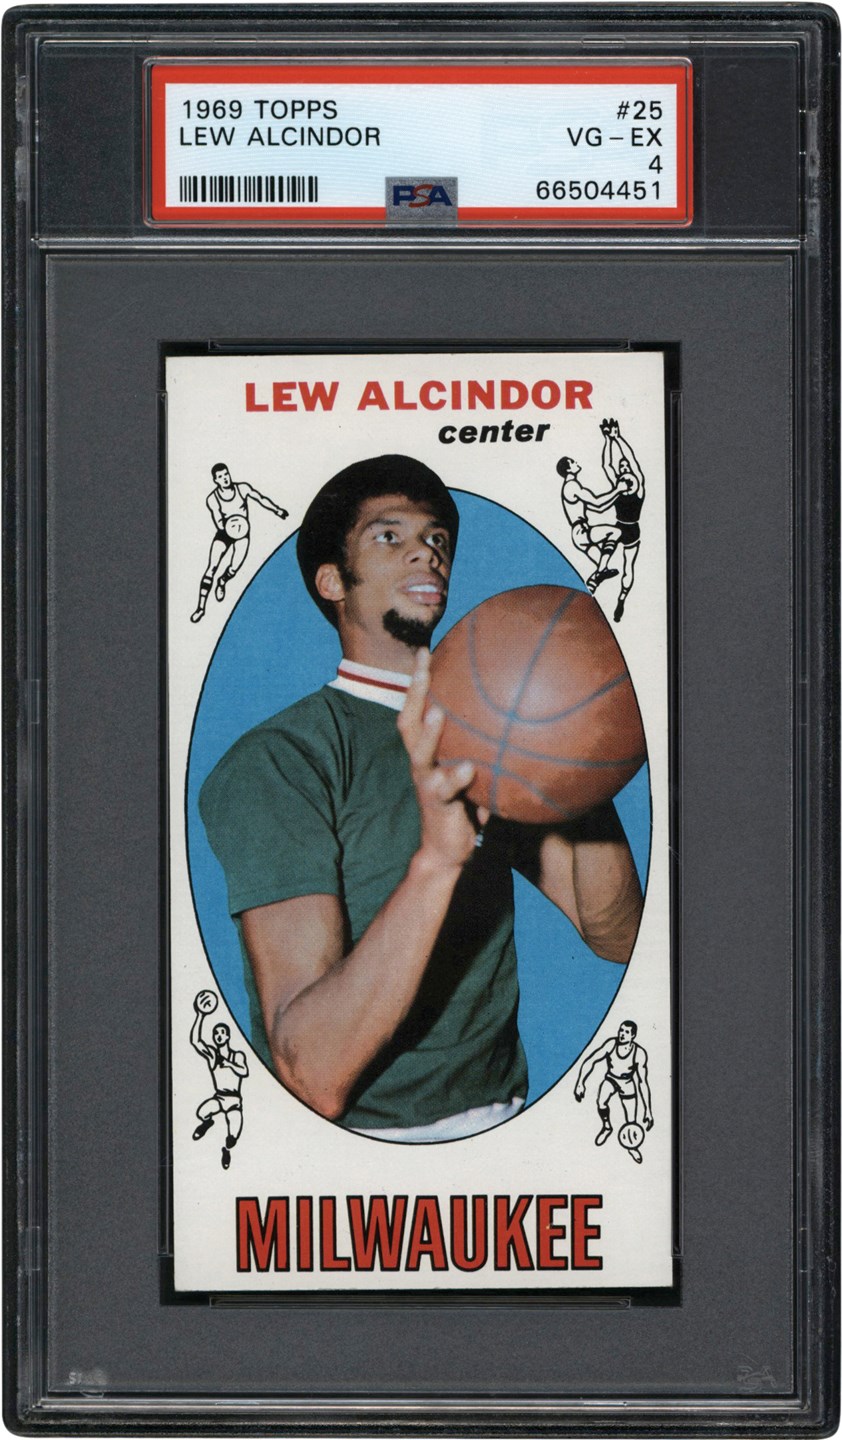 Basketball Cards - 1969 Topps Basketball #25 Lew Alcindor Rookie Card PSA VG-EX 4